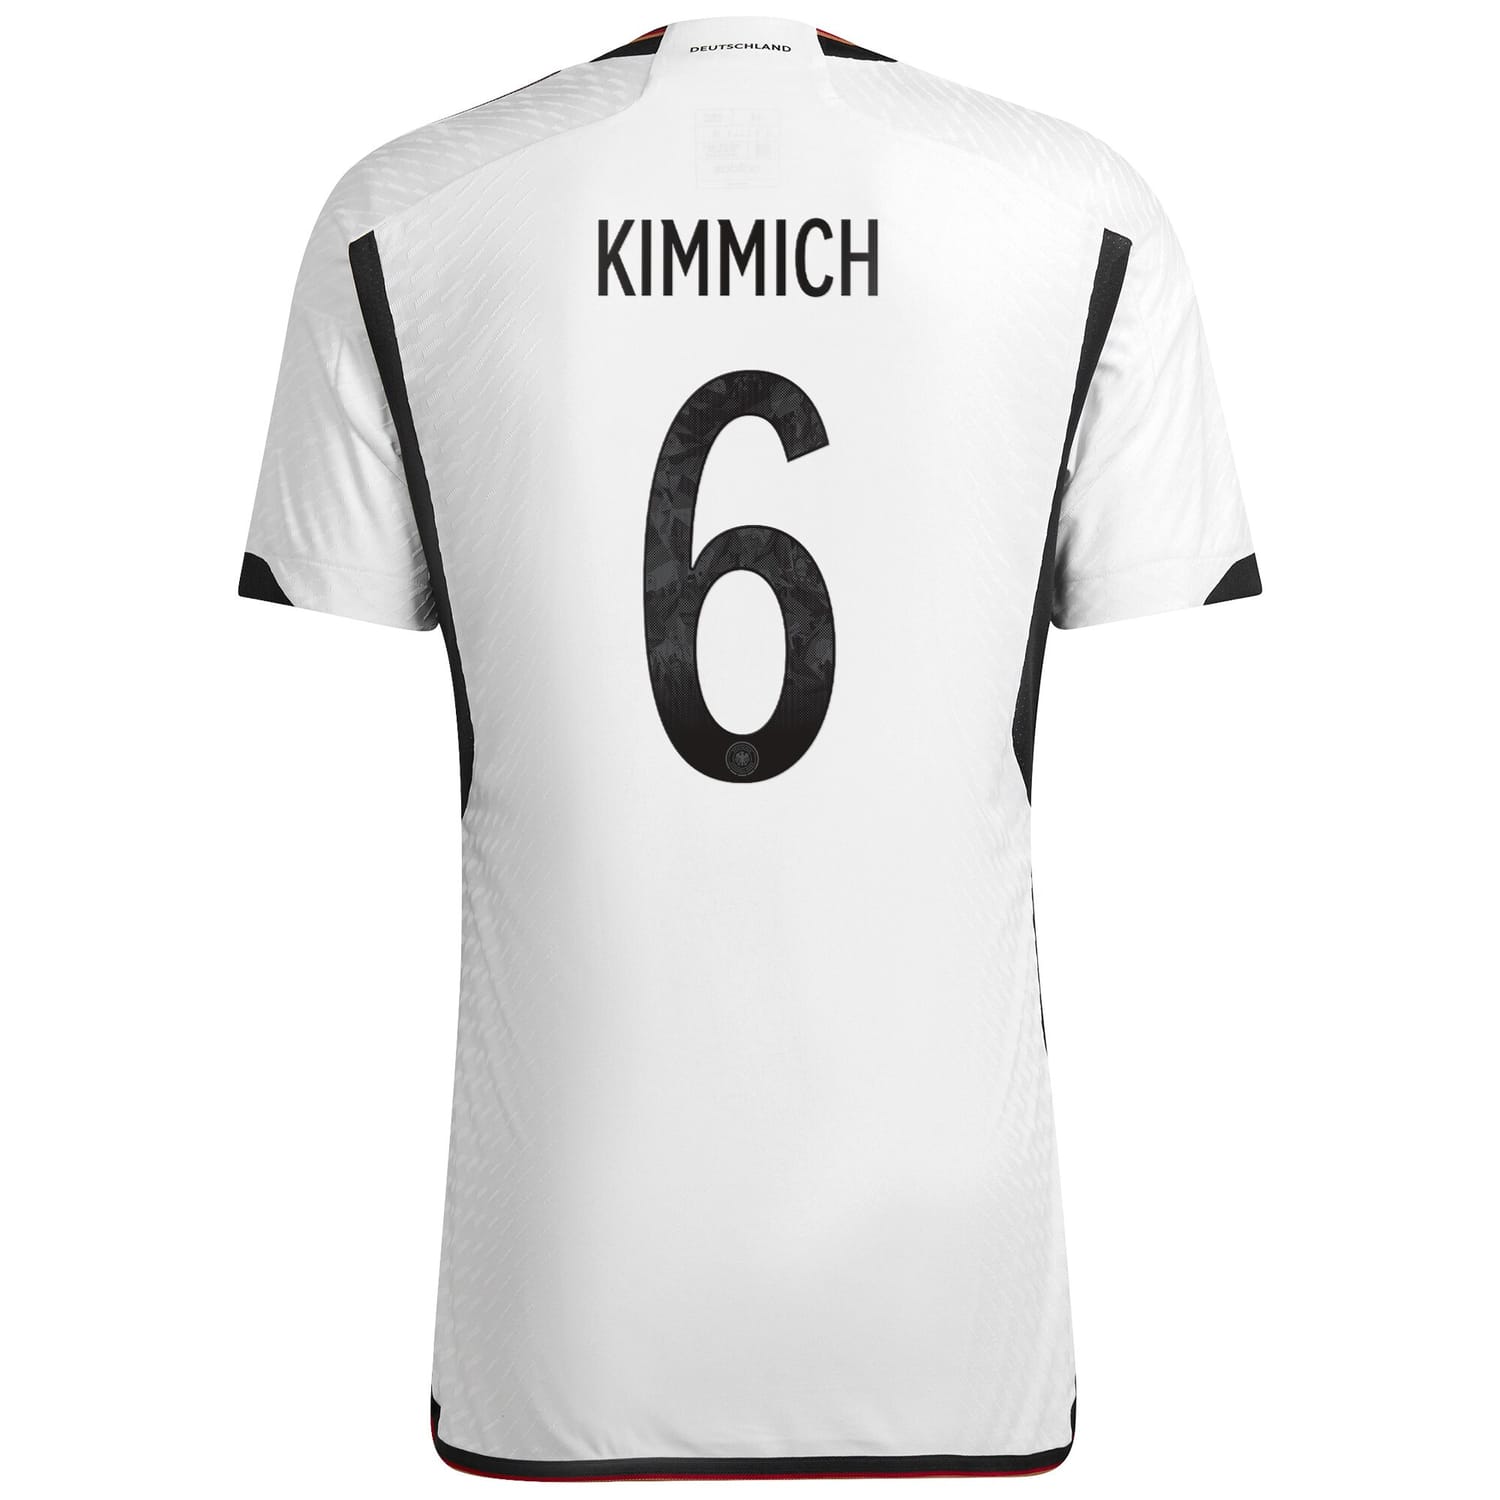 Germany National Team Home Jersey Shirt White 2022-23 player Joshua Kimmich printing for Men